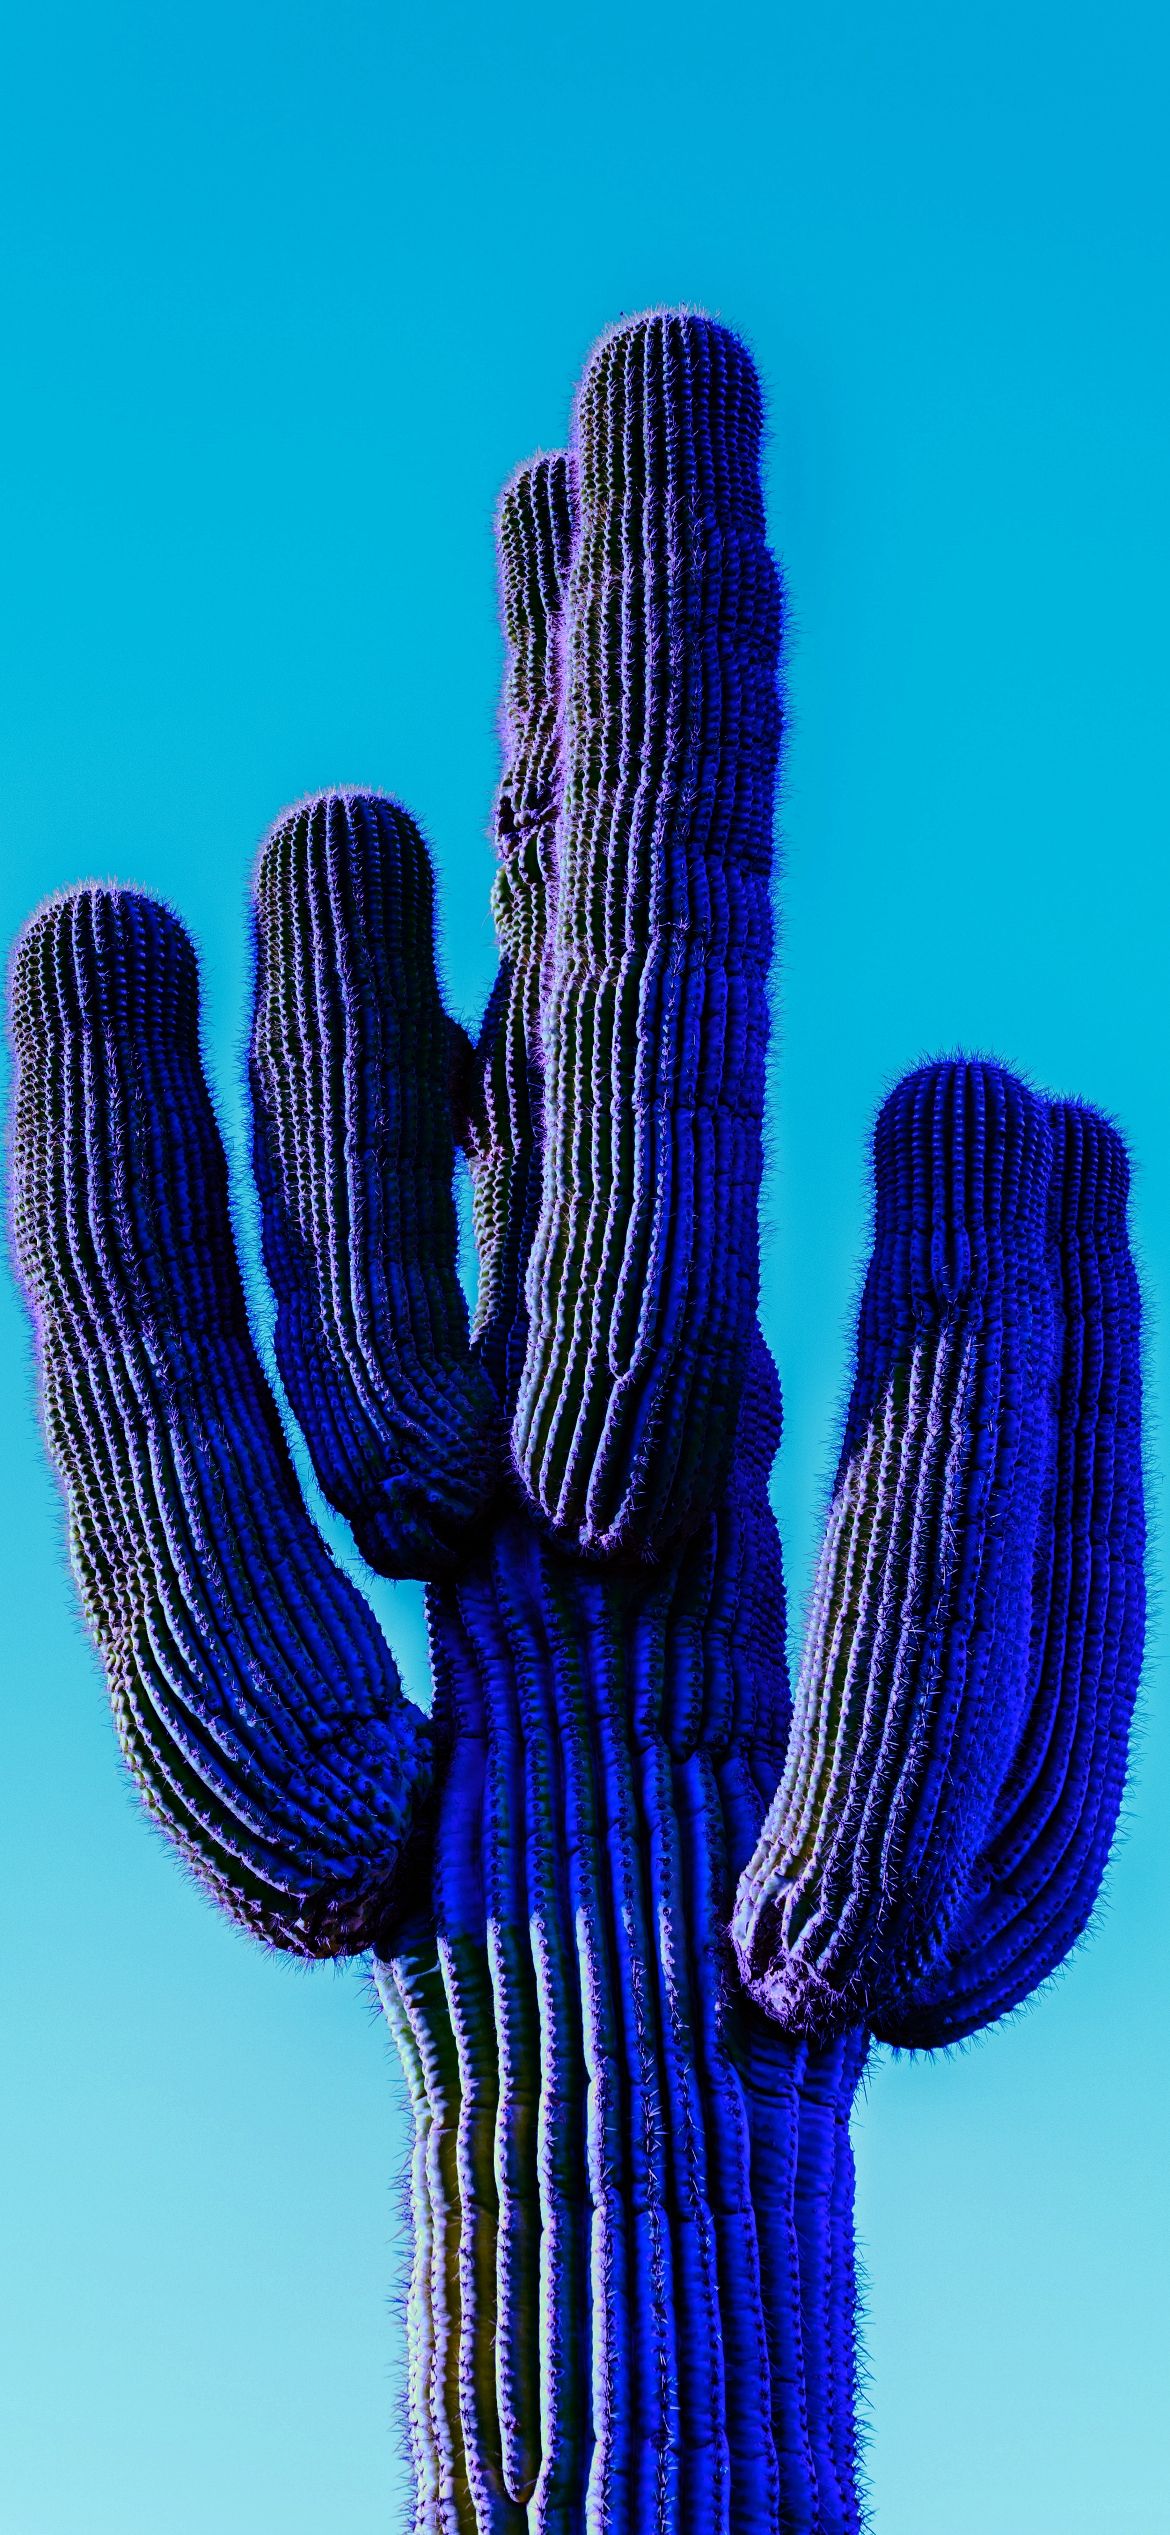 A blue cactus with a blue sky in the background - Cactus